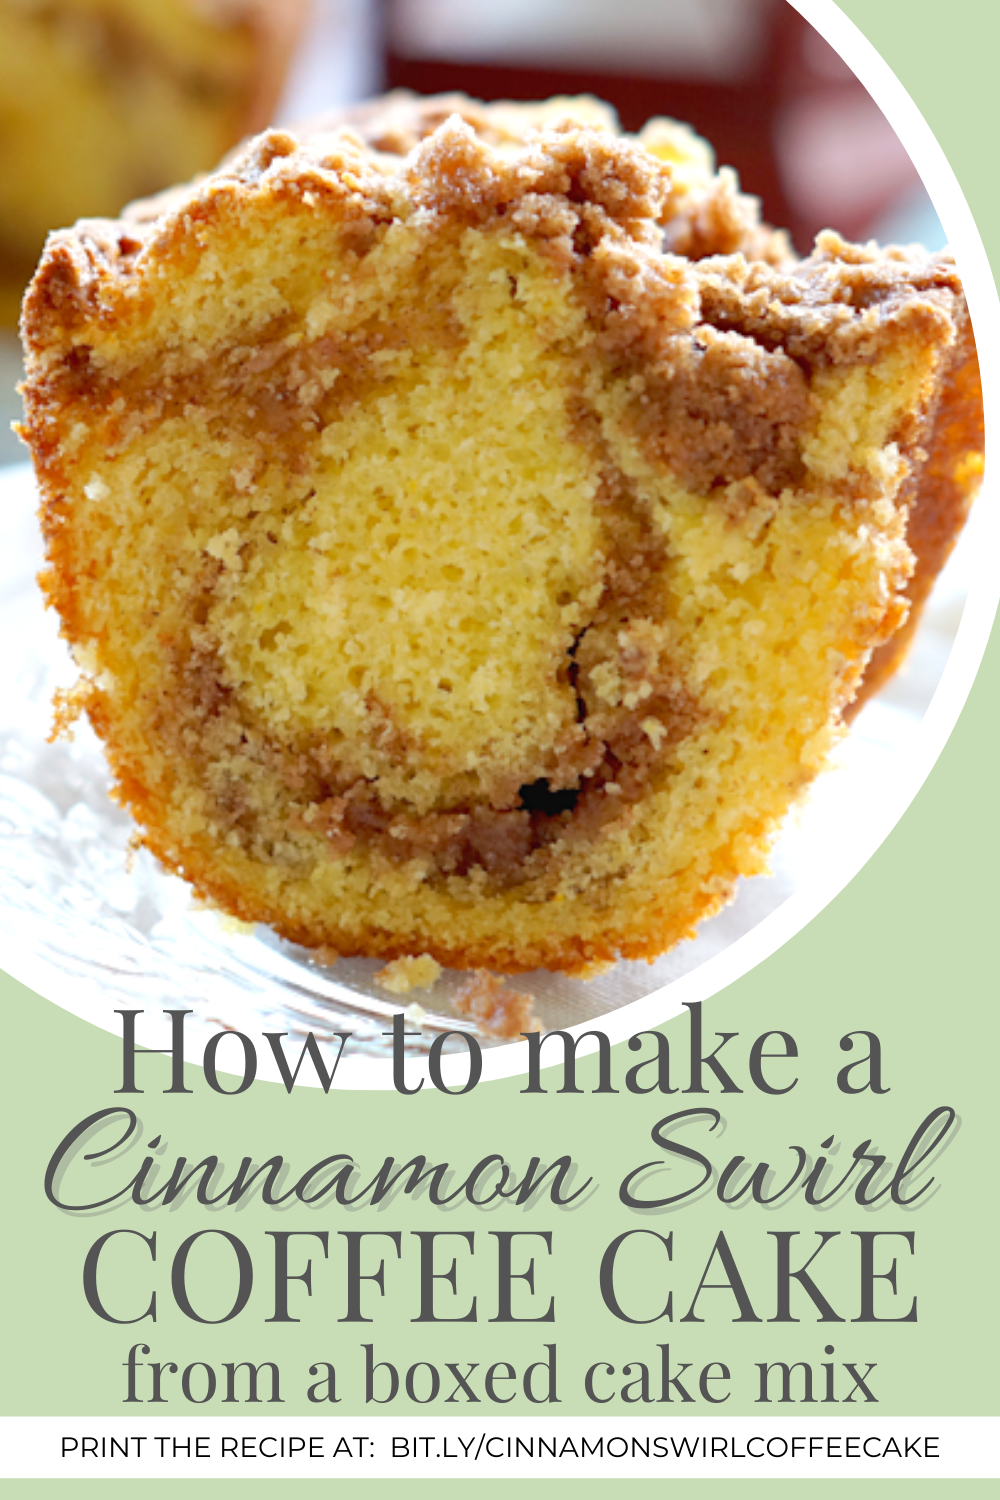 How to Make a Cinnamon Swirl Coffee Cake from a Boxed Cake Mix